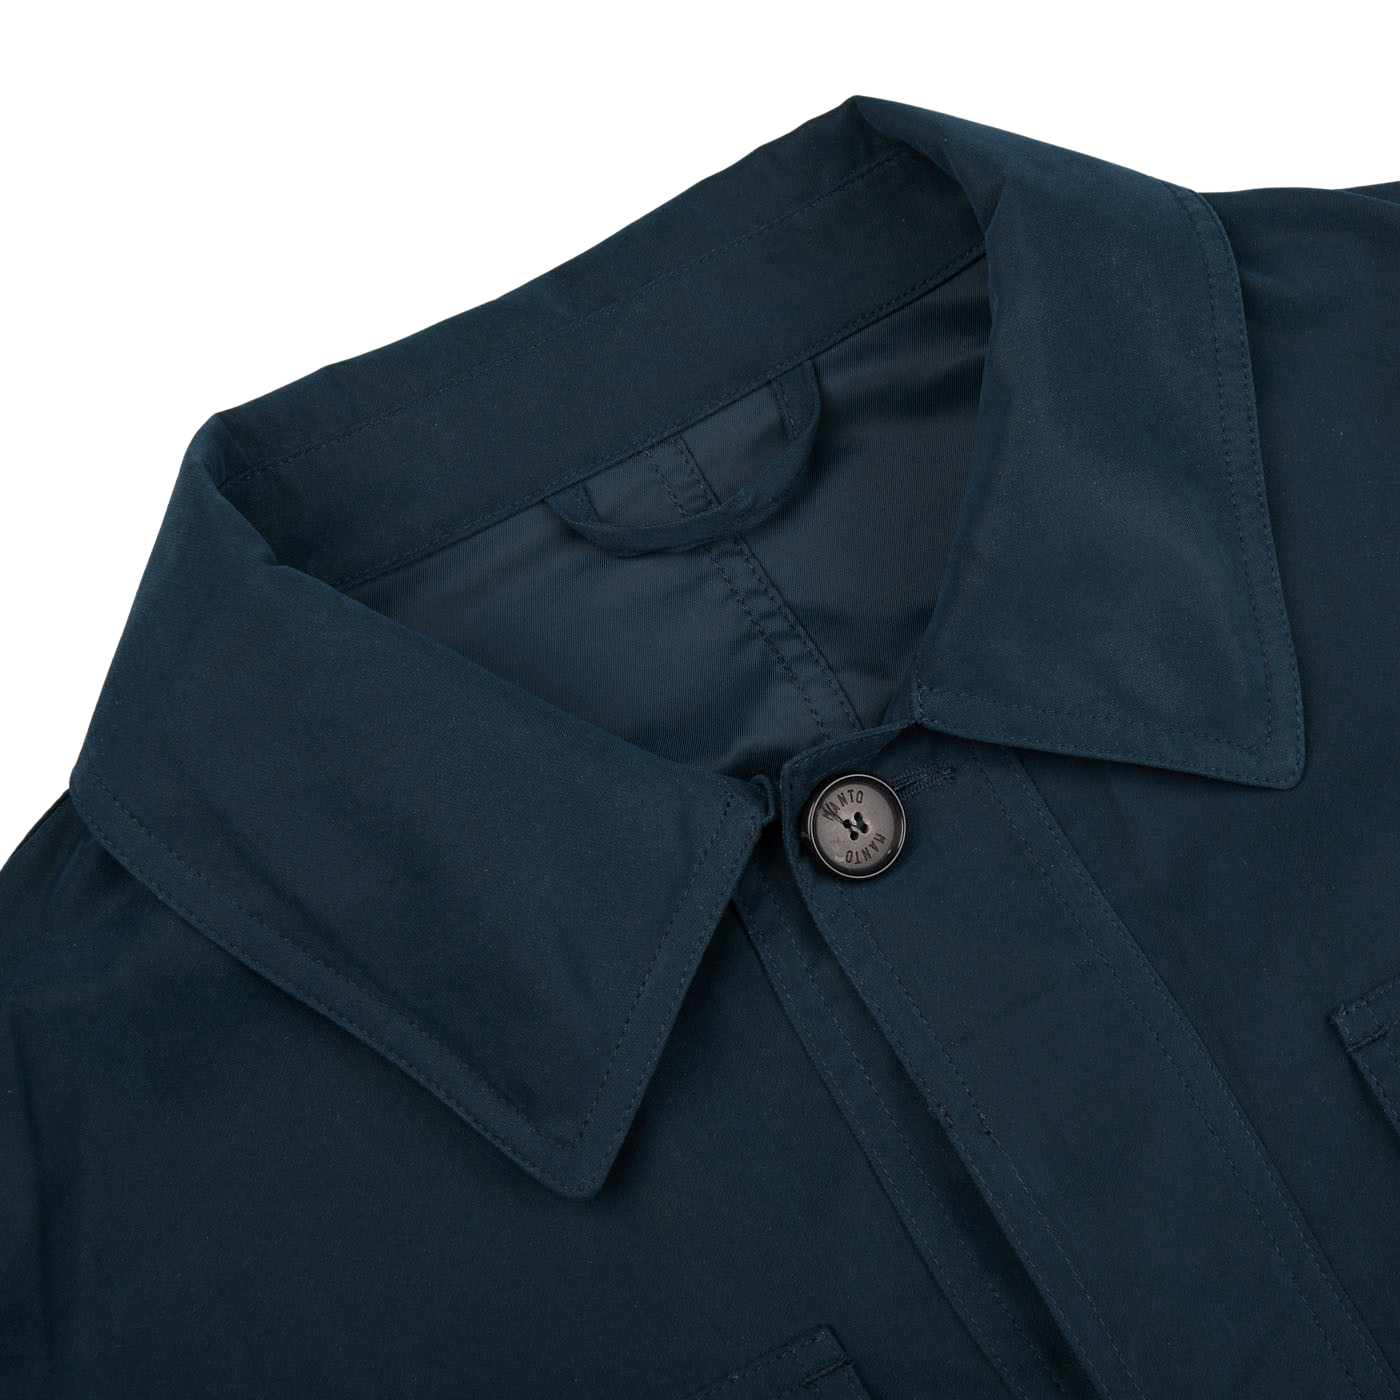 A slim fit Navy Blue Ultrafine Microfiber Safari Jacket with buttons from Manto.